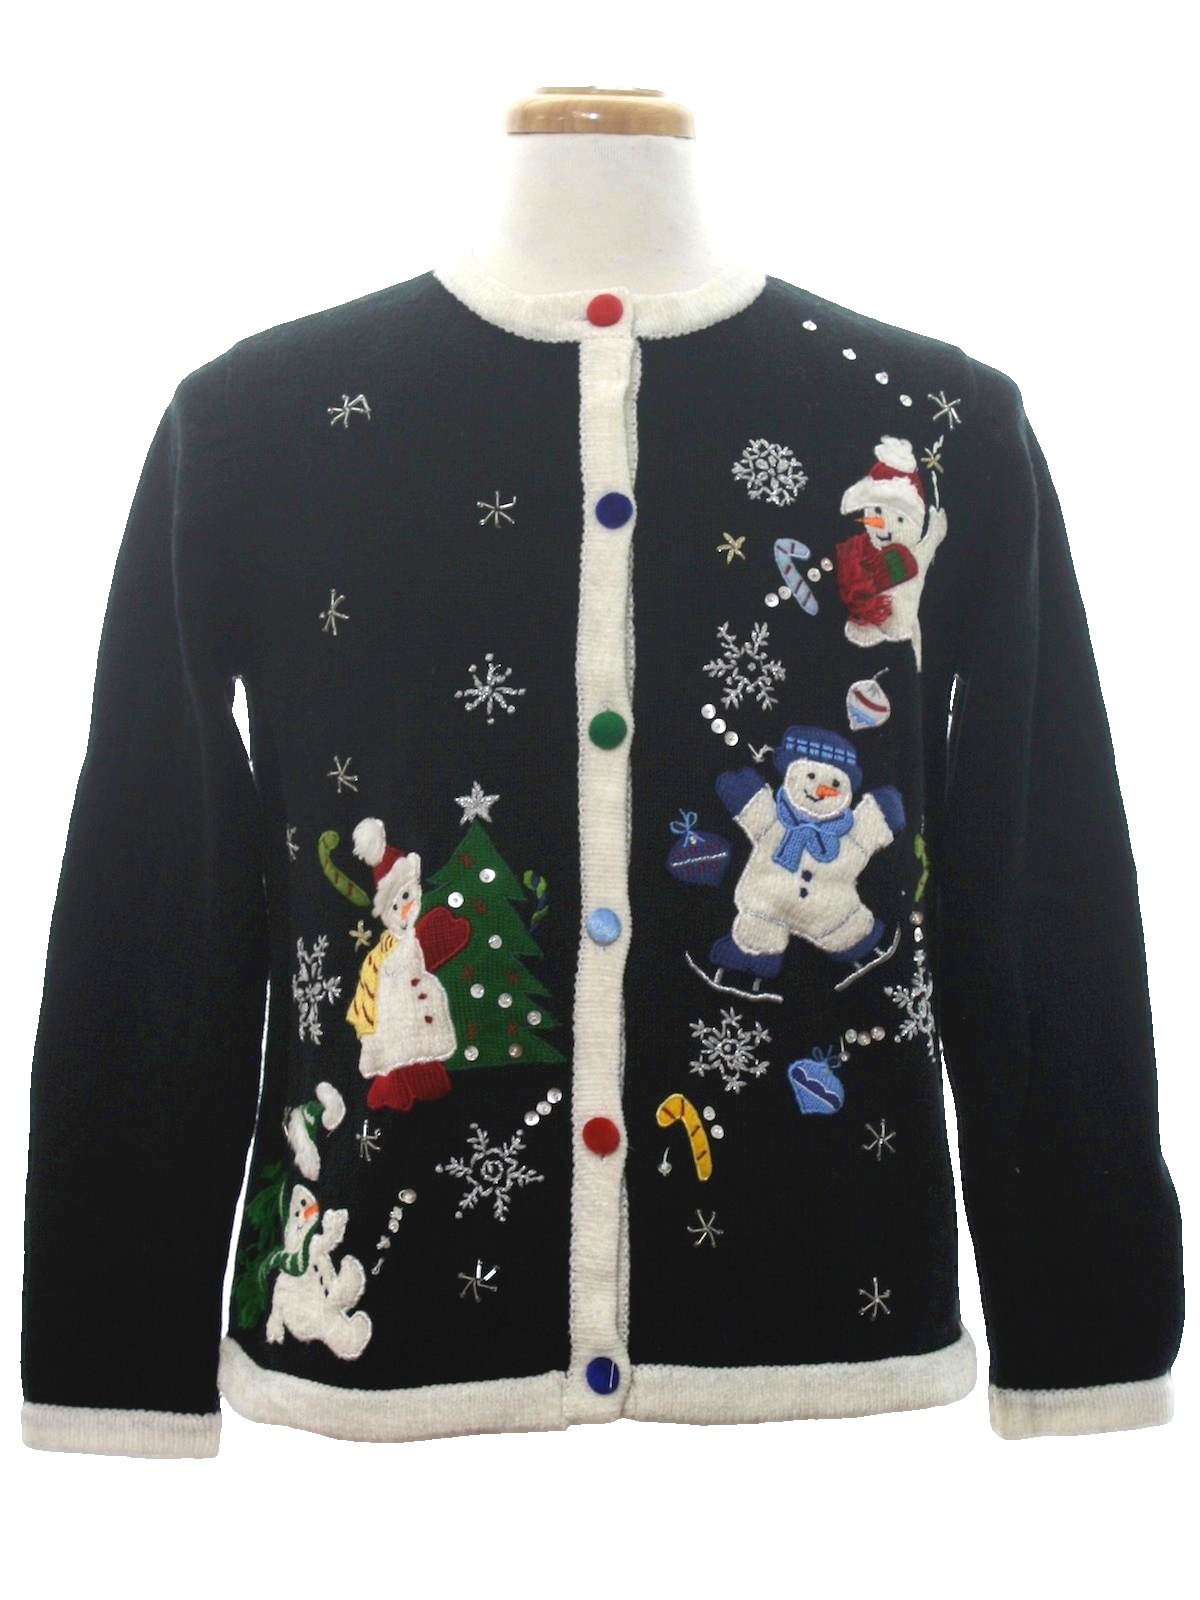 Womens Ugly Christmas Sweater: -All Points by Reference Point- Womens ...